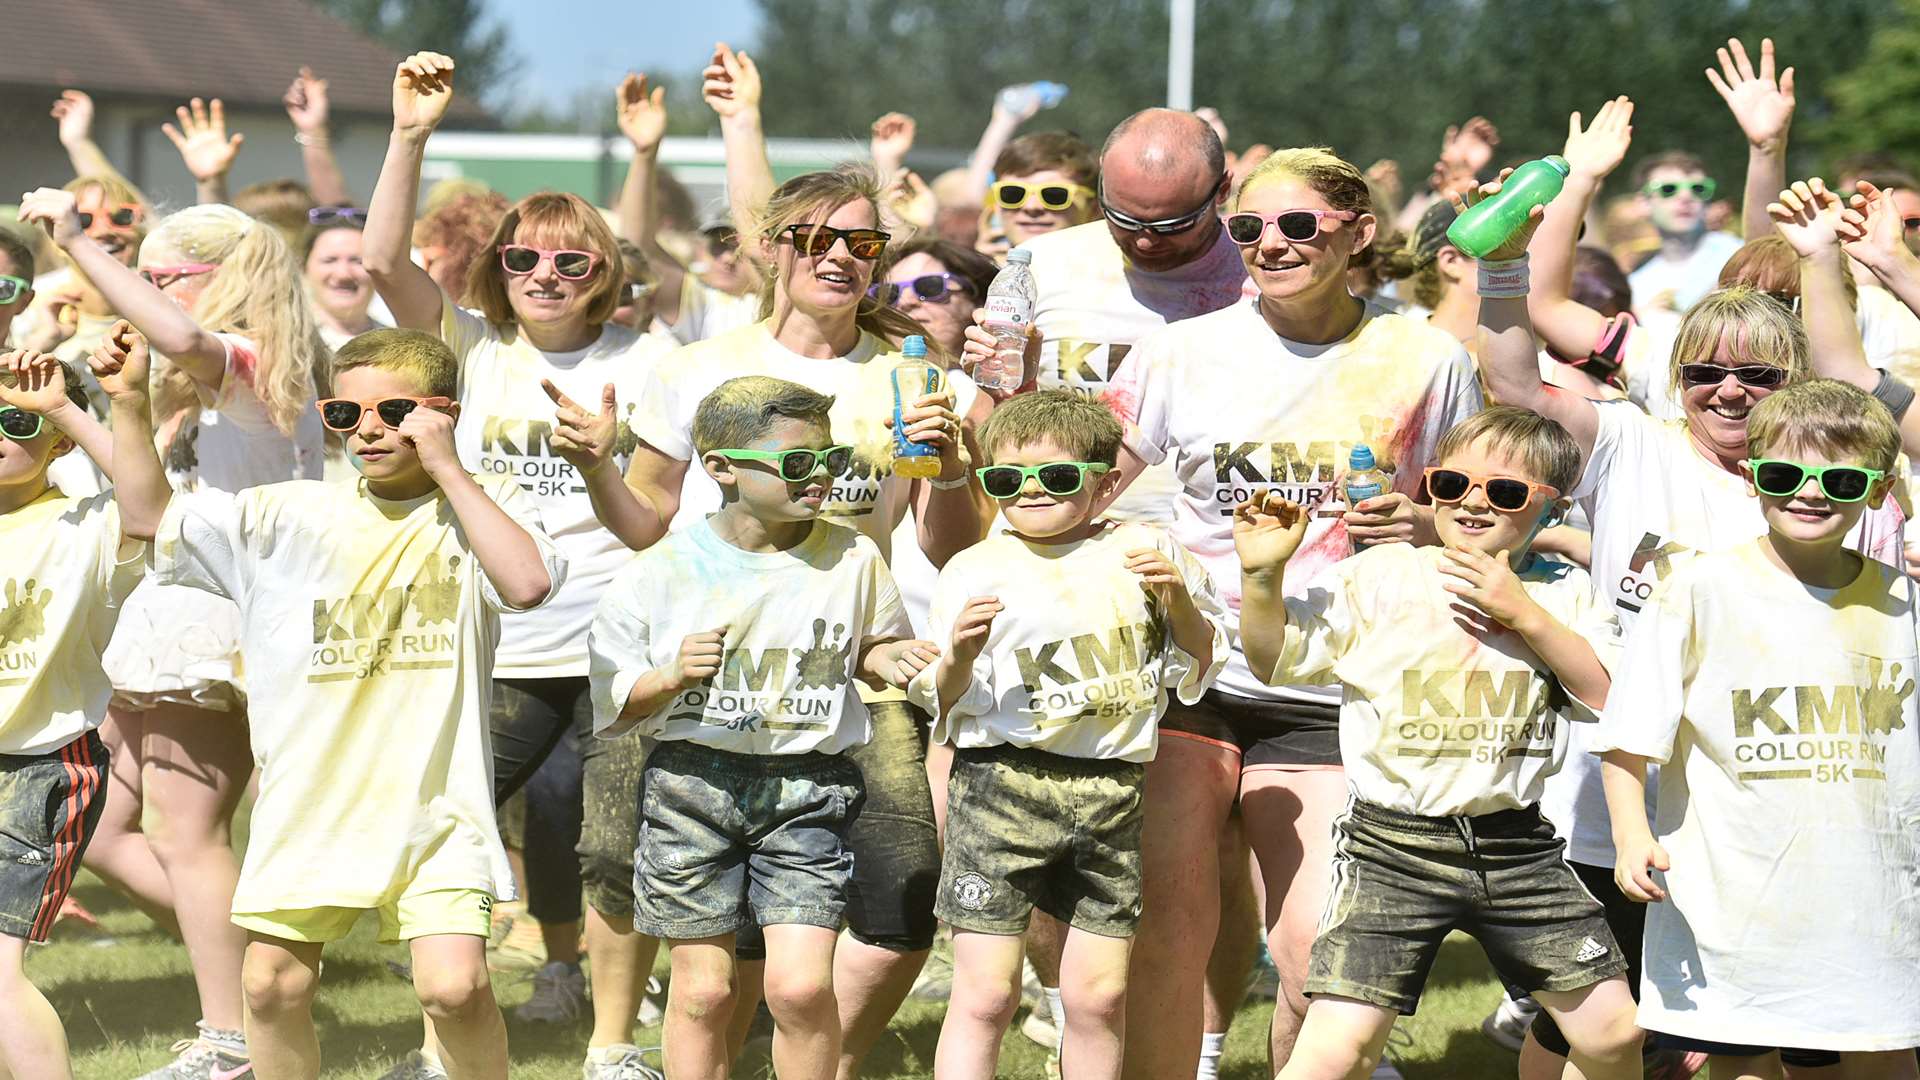 Booking is now open for the KM Colour Run 2016 staged at Betteshanger Park, Nr Deal on Sunday, June 12.